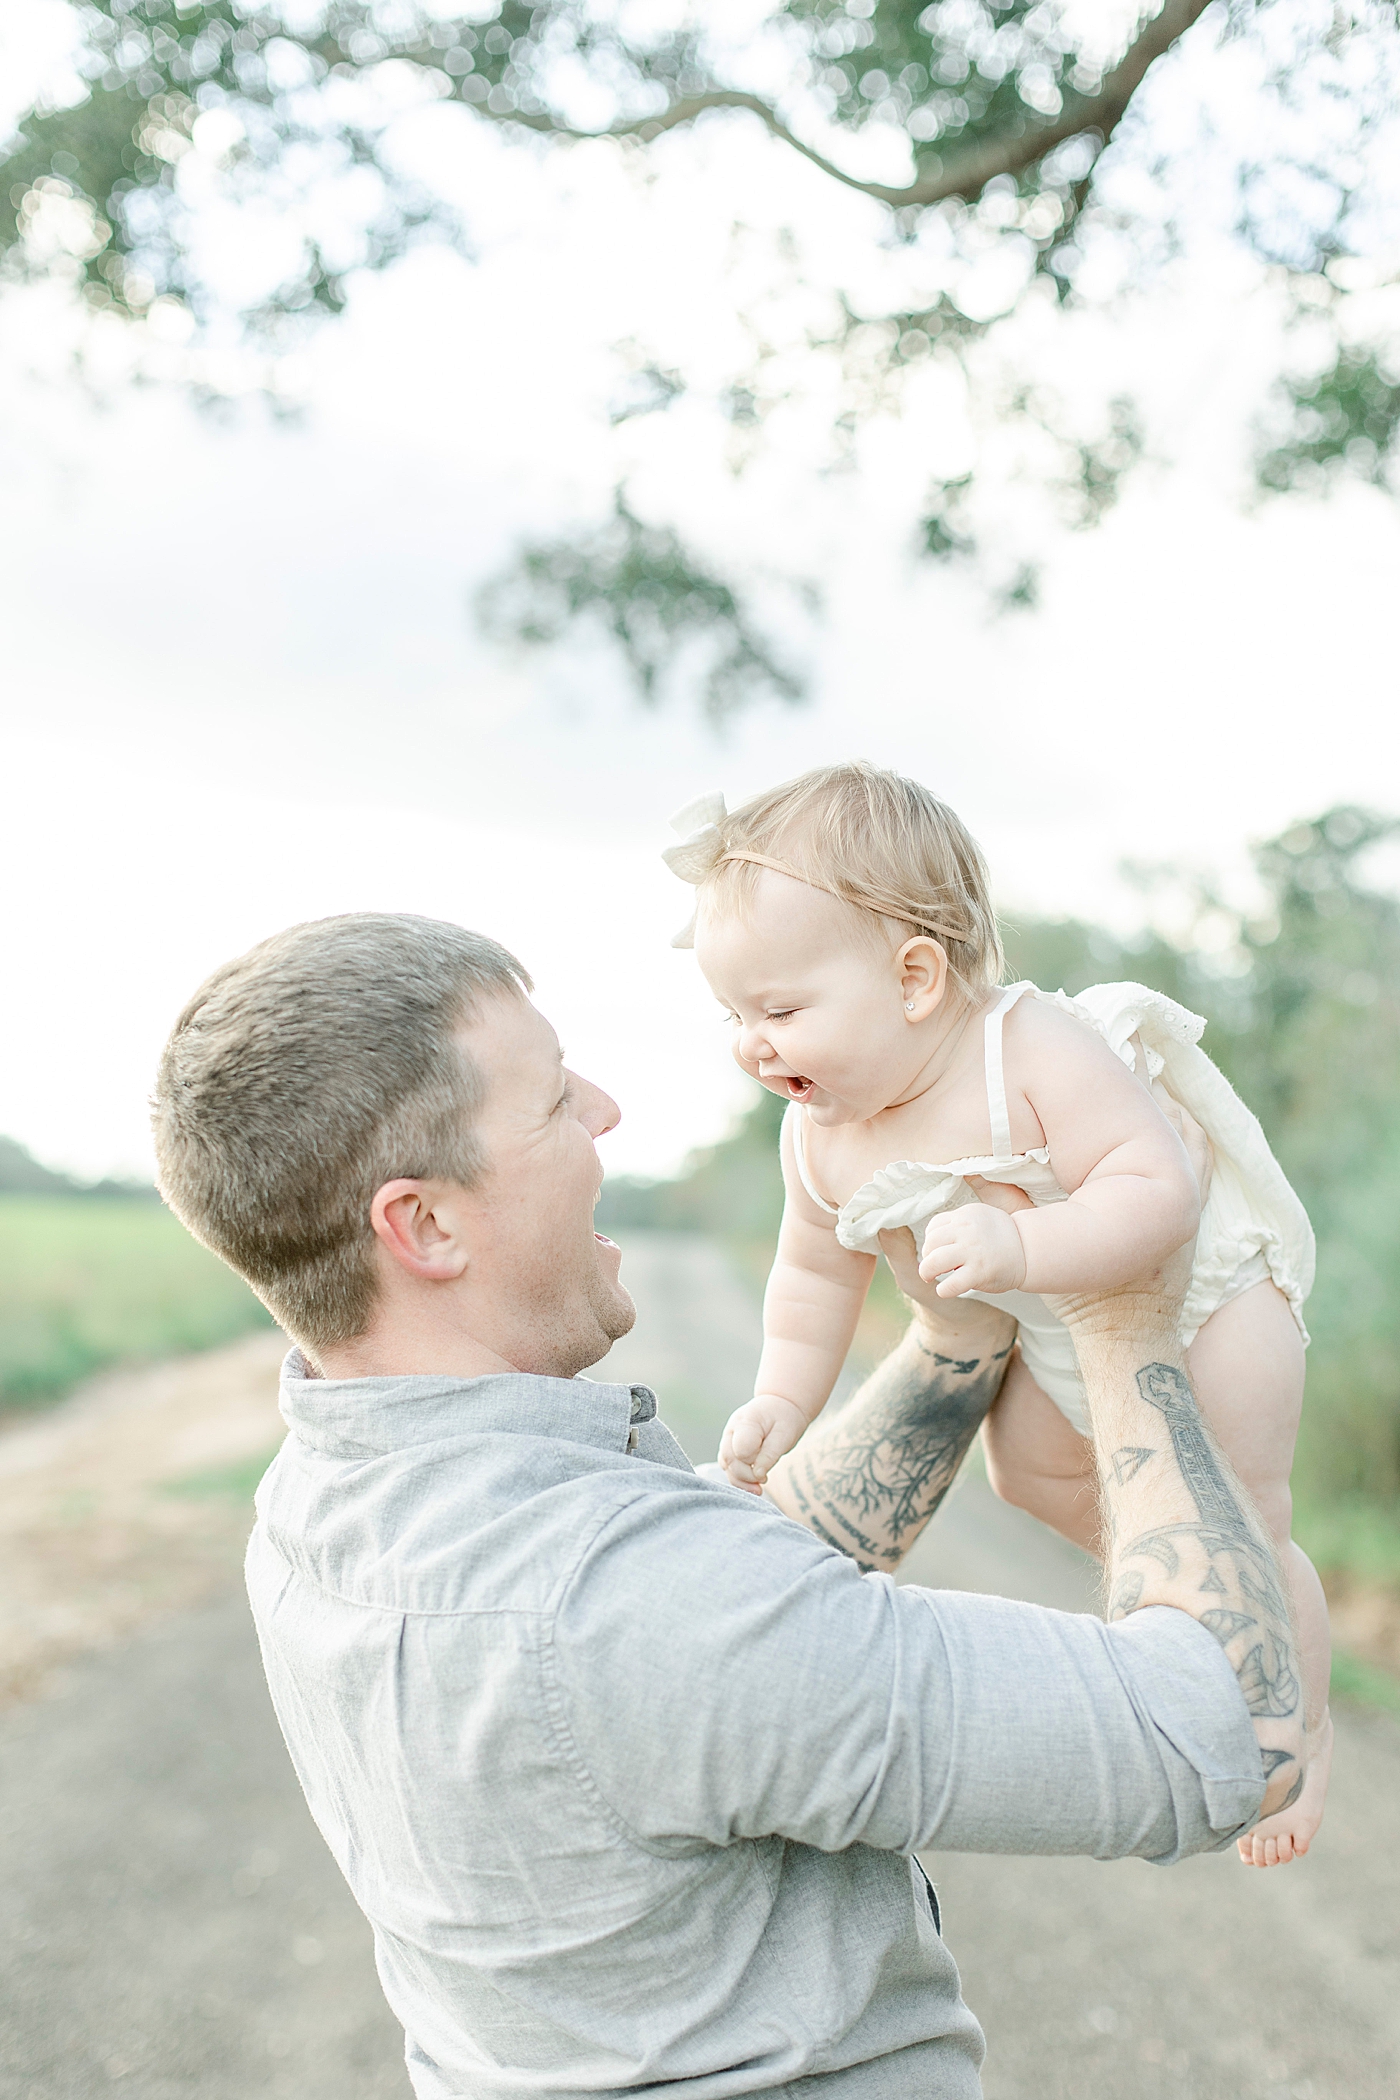 Dad playing airplane with baby girl | Photo by Little Sunshine Photography 